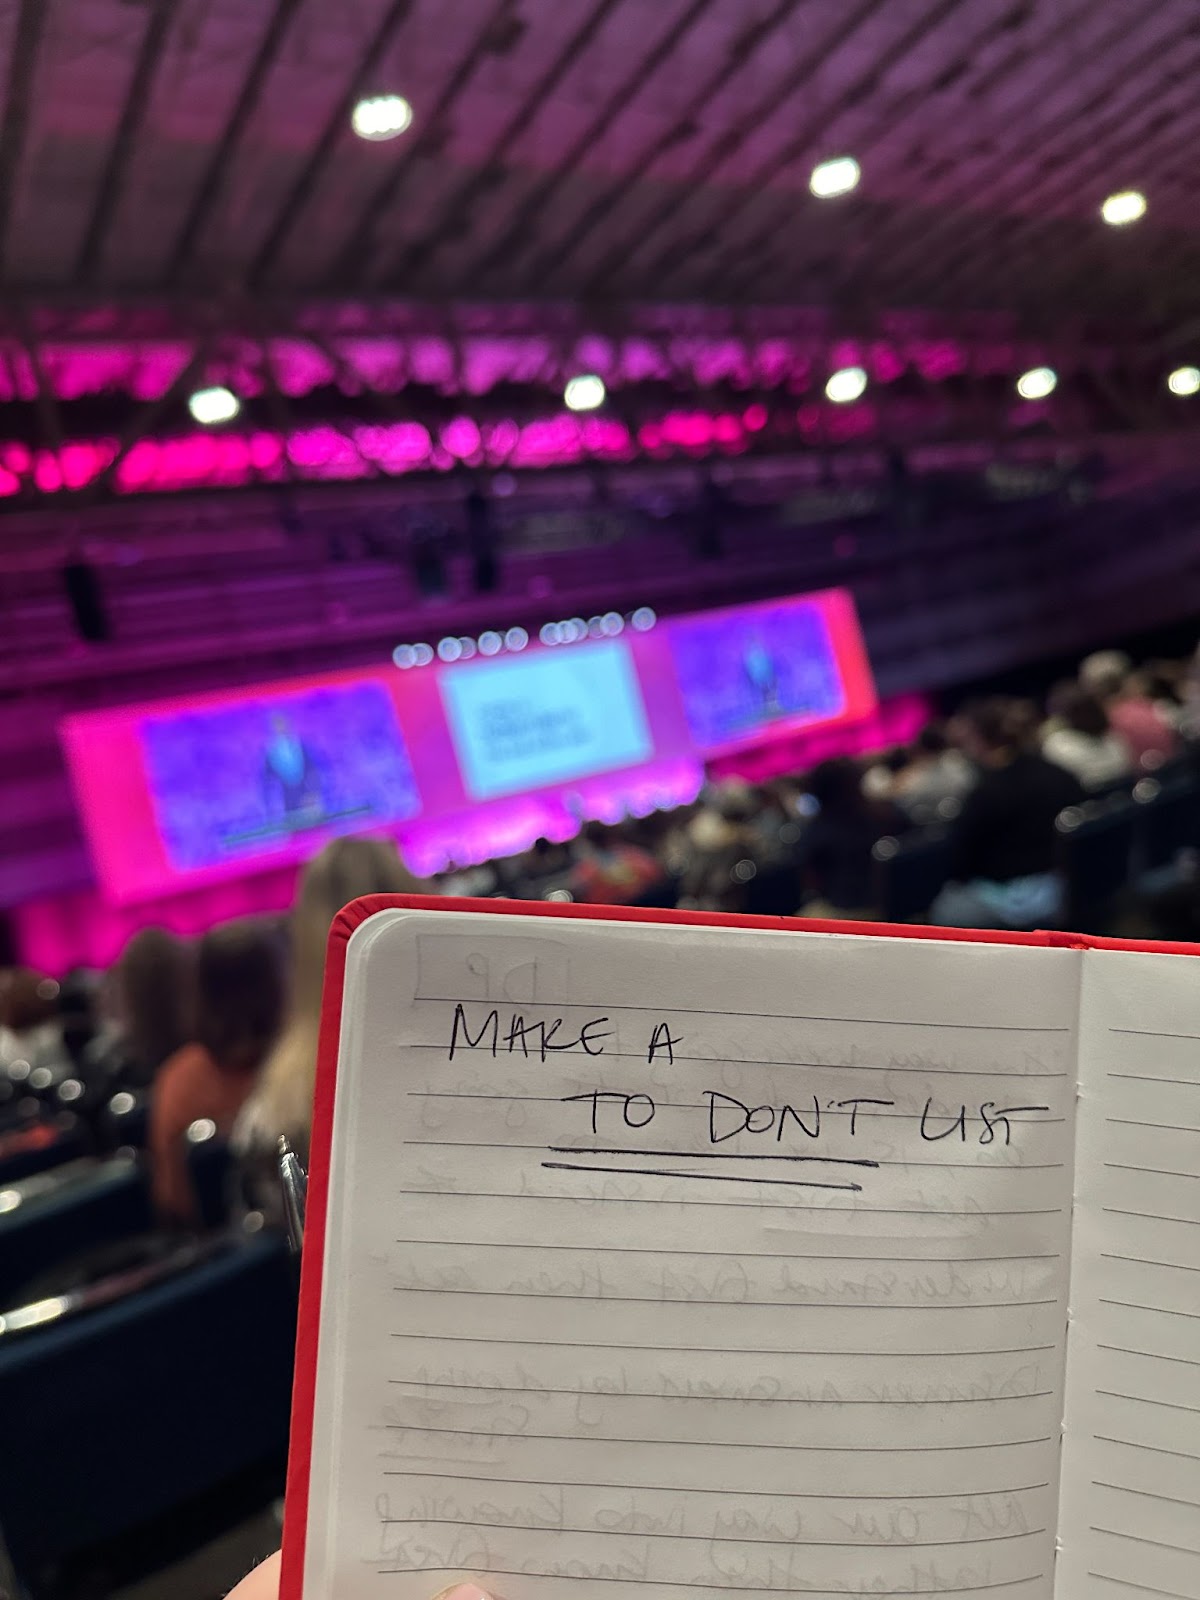 This is a picture of a notebook held up in front of the stage at a conference. The notebook has the words, "Make a To Don't List" written on it.